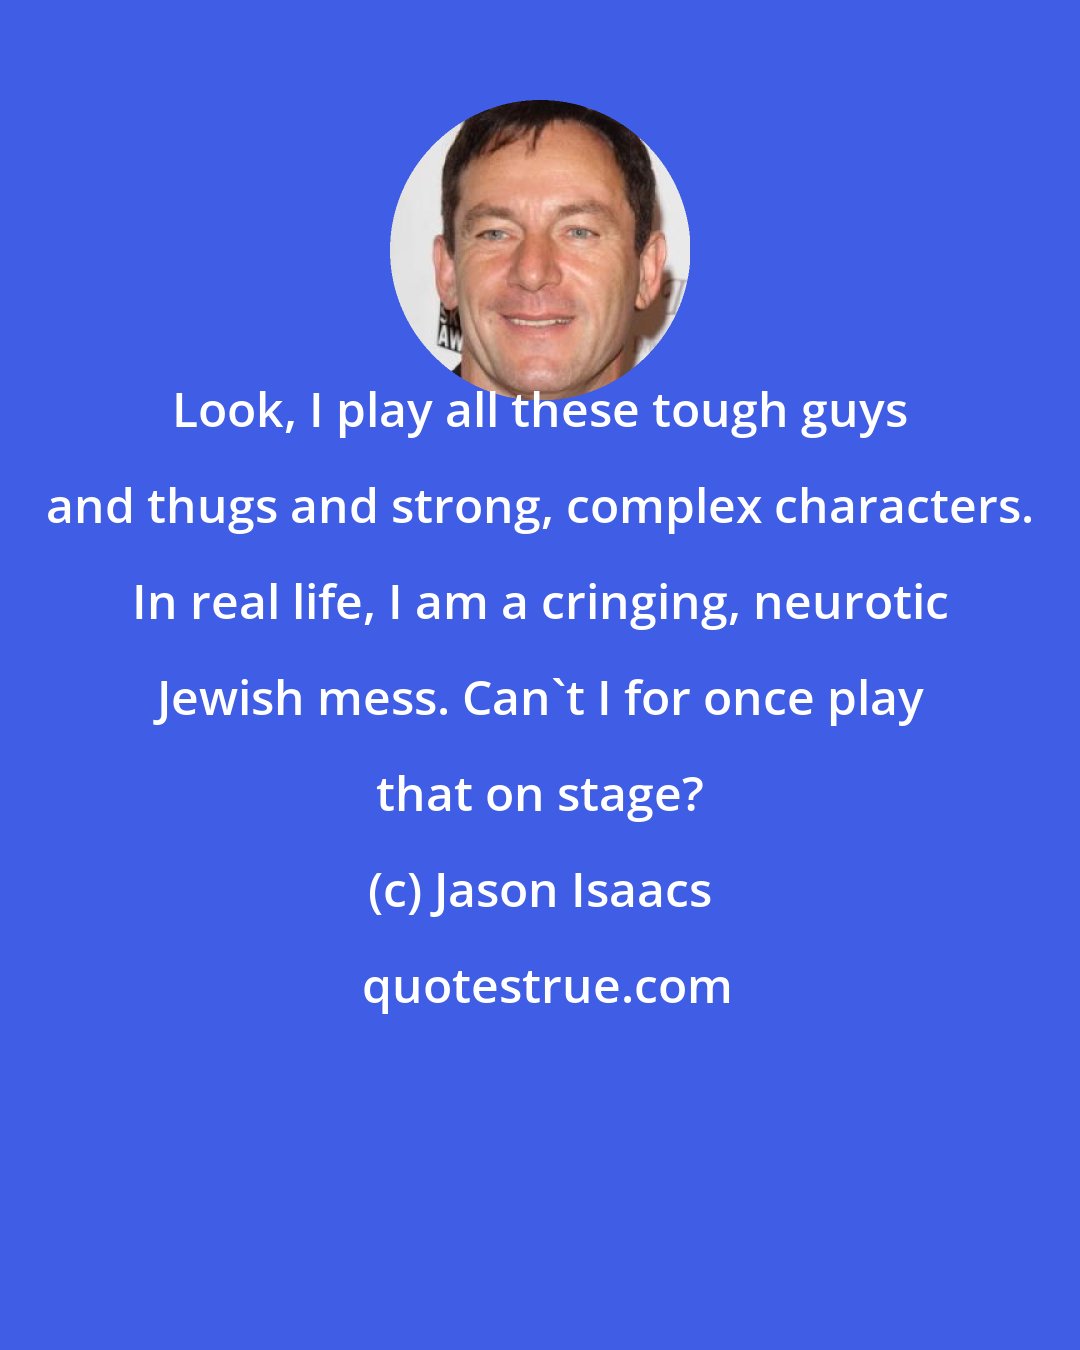 Jason Isaacs: Look, I play all these tough guys and thugs and strong, complex characters. In real life, I am a cringing, neurotic Jewish mess. Can't I for once play that on stage?